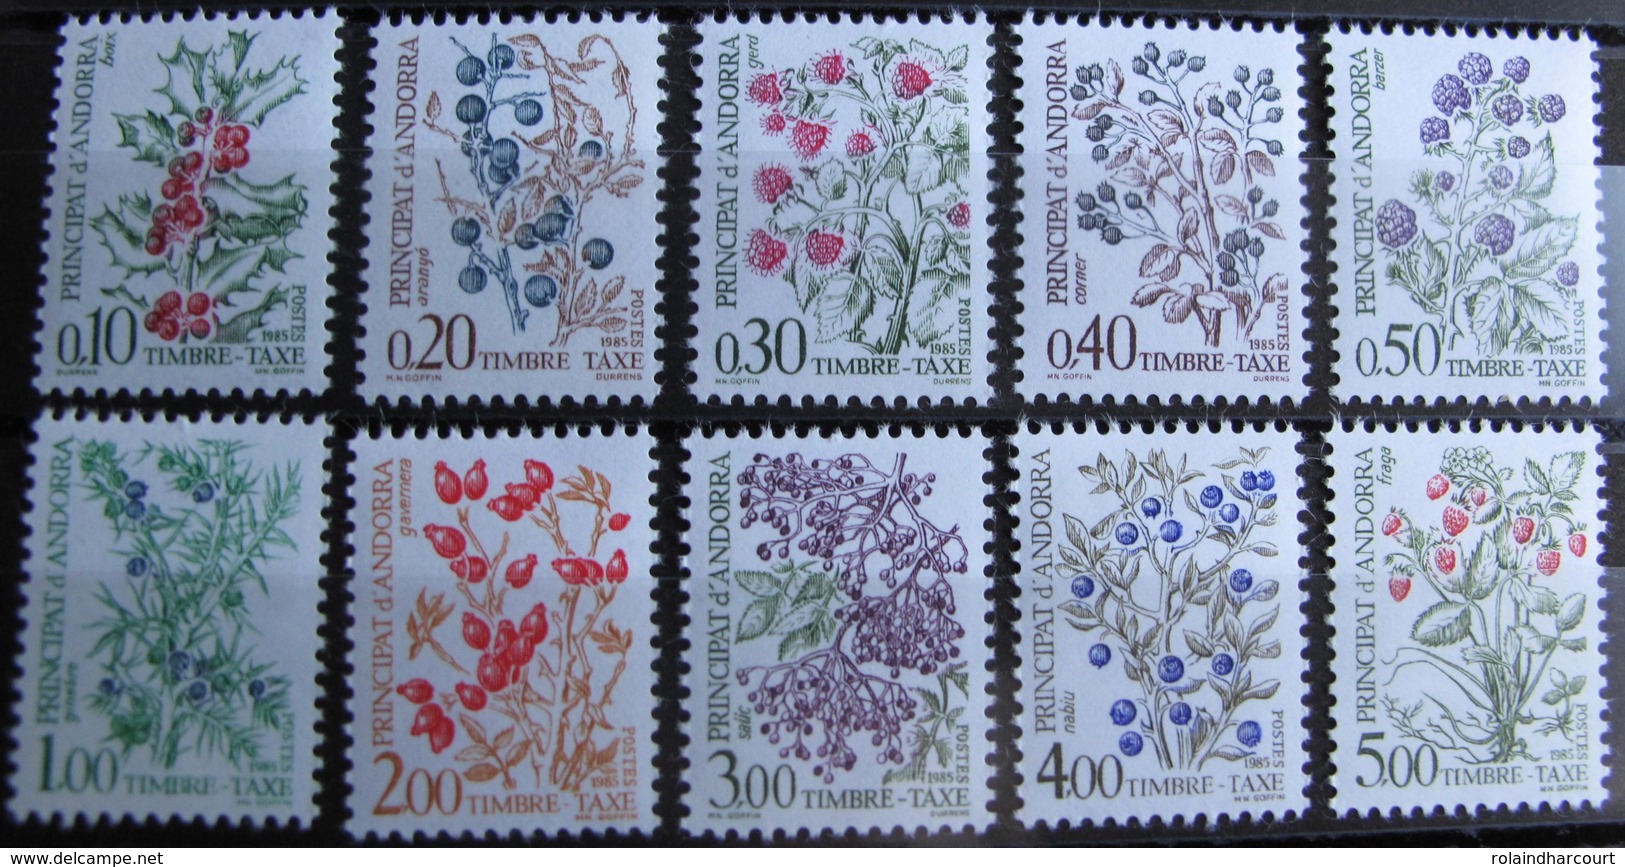 FD/2481 - 1985 - ANDORRE - TIMBRES TAXE - N°53 à 62 NEUFS** (SERIE COMPLETE) - Nuovi